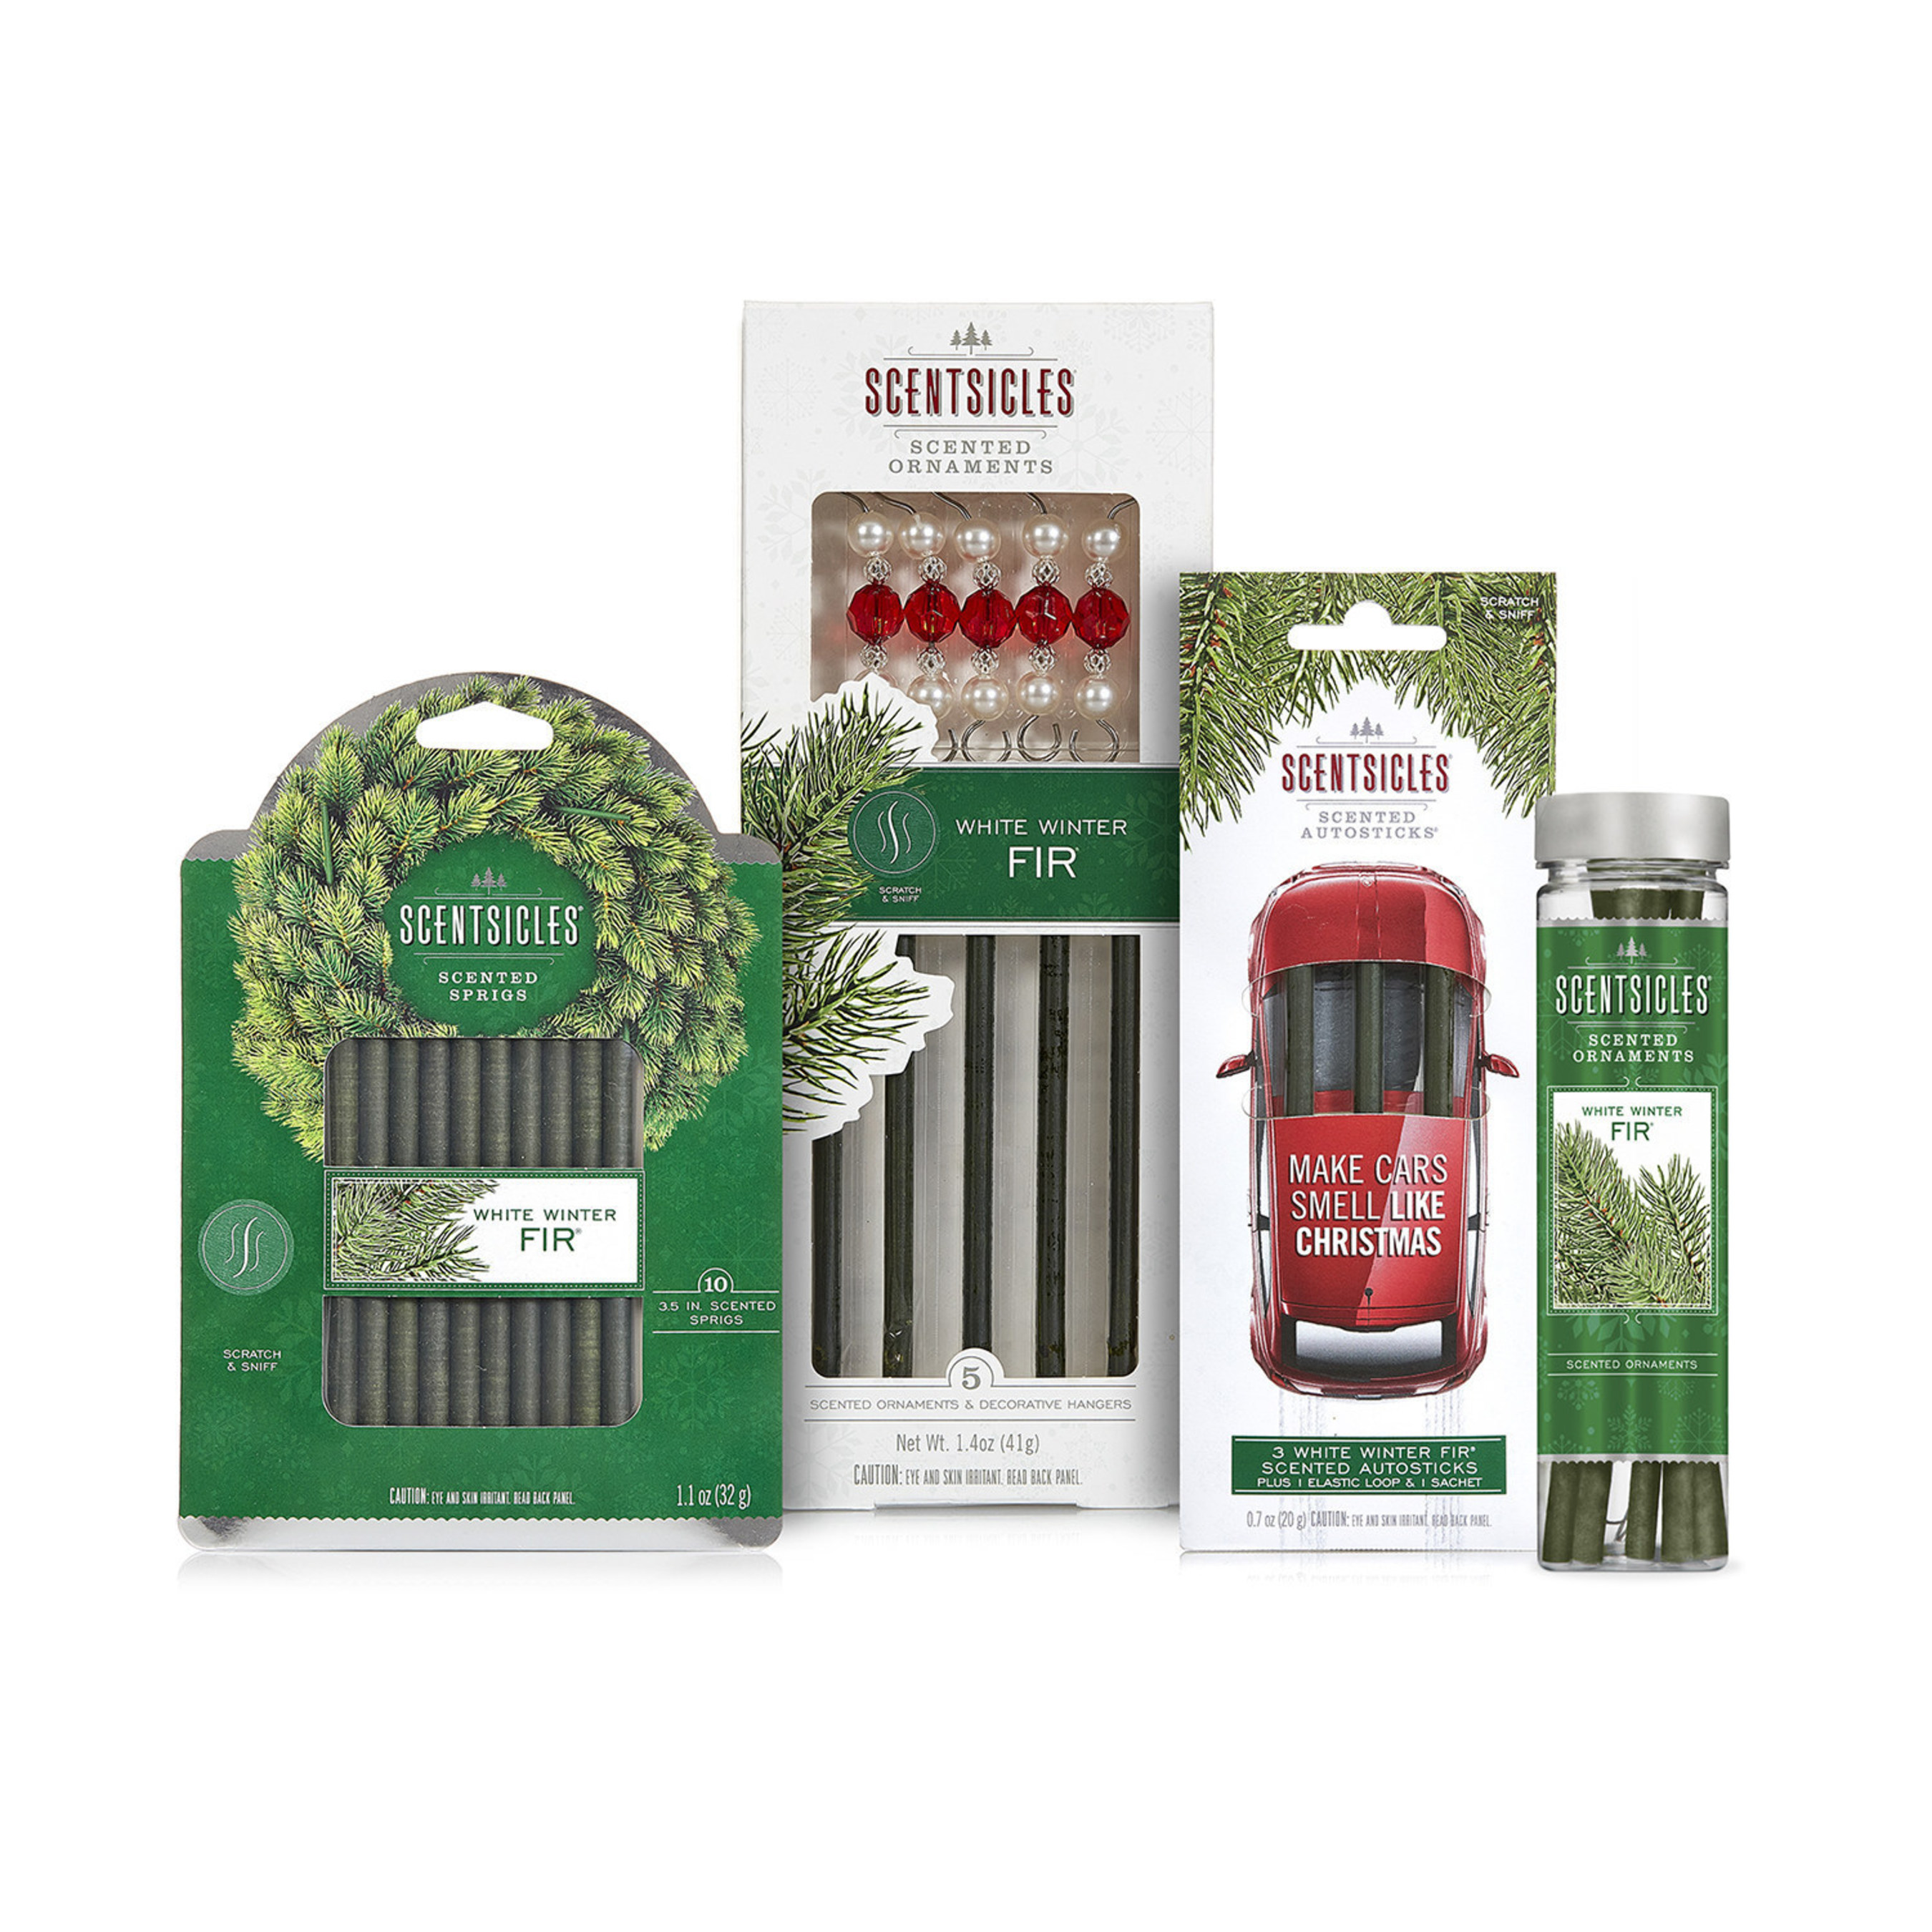 ScentSicles New Holiday Line Offers the Nostalgic Smell of Christmas